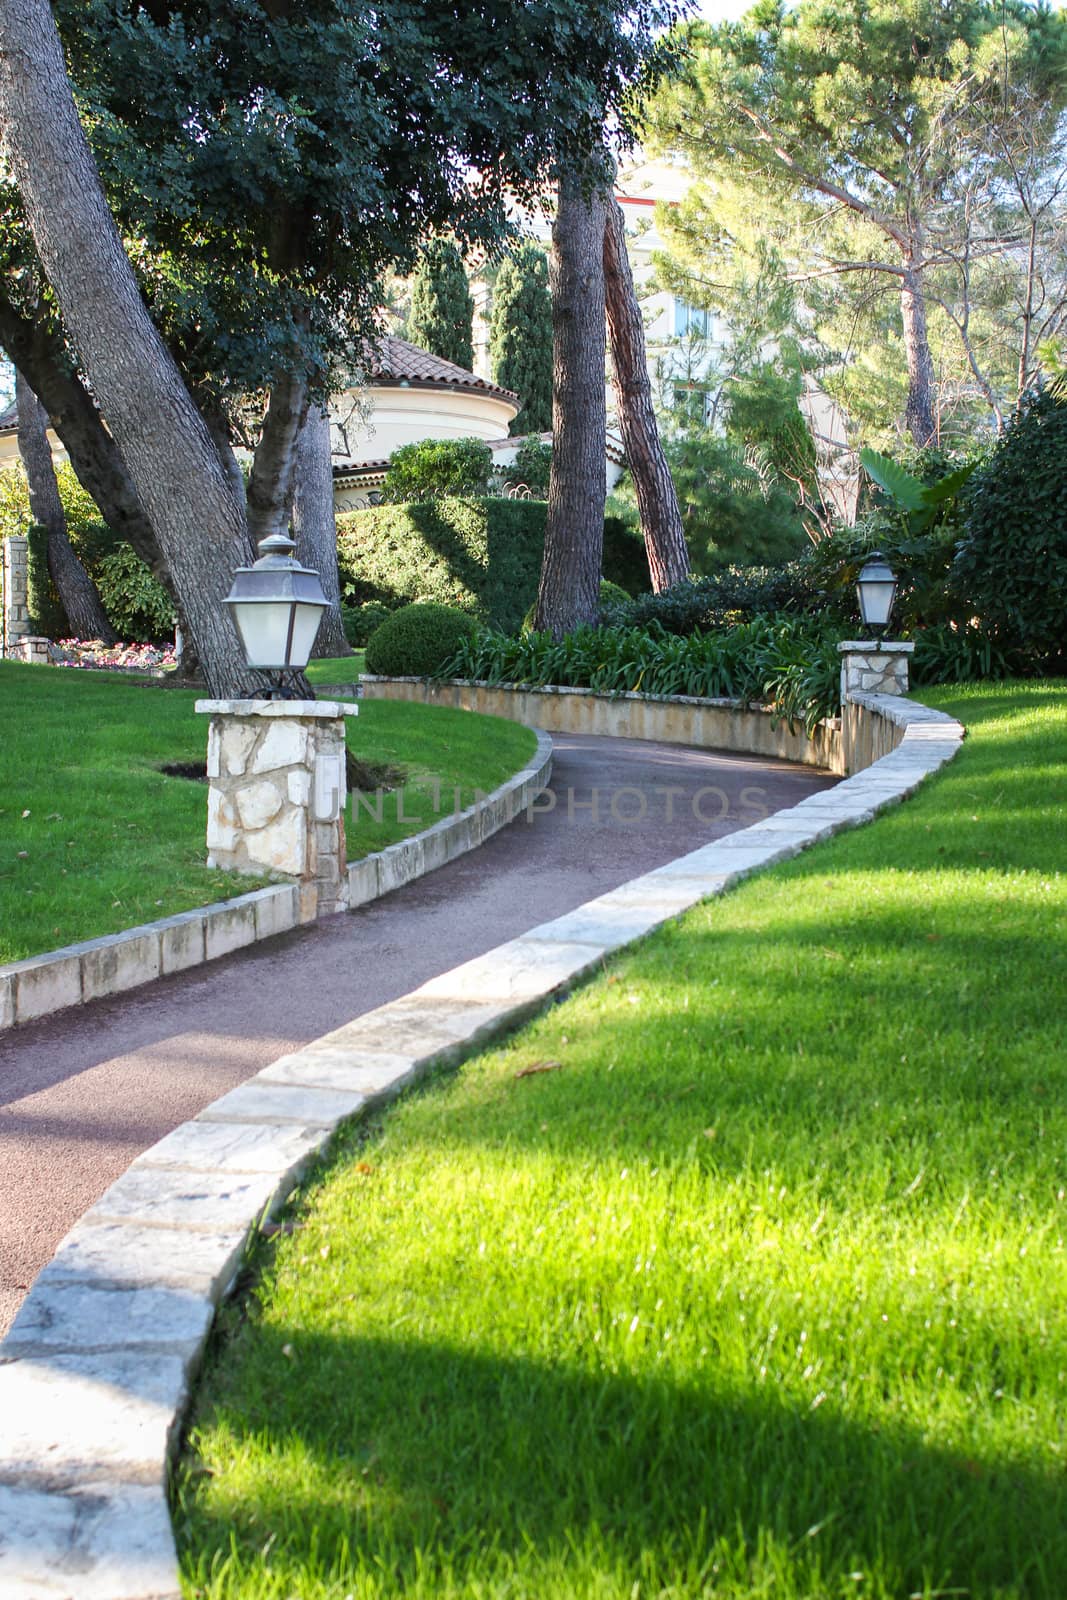 Walkway with Green Grass and Trees in the background